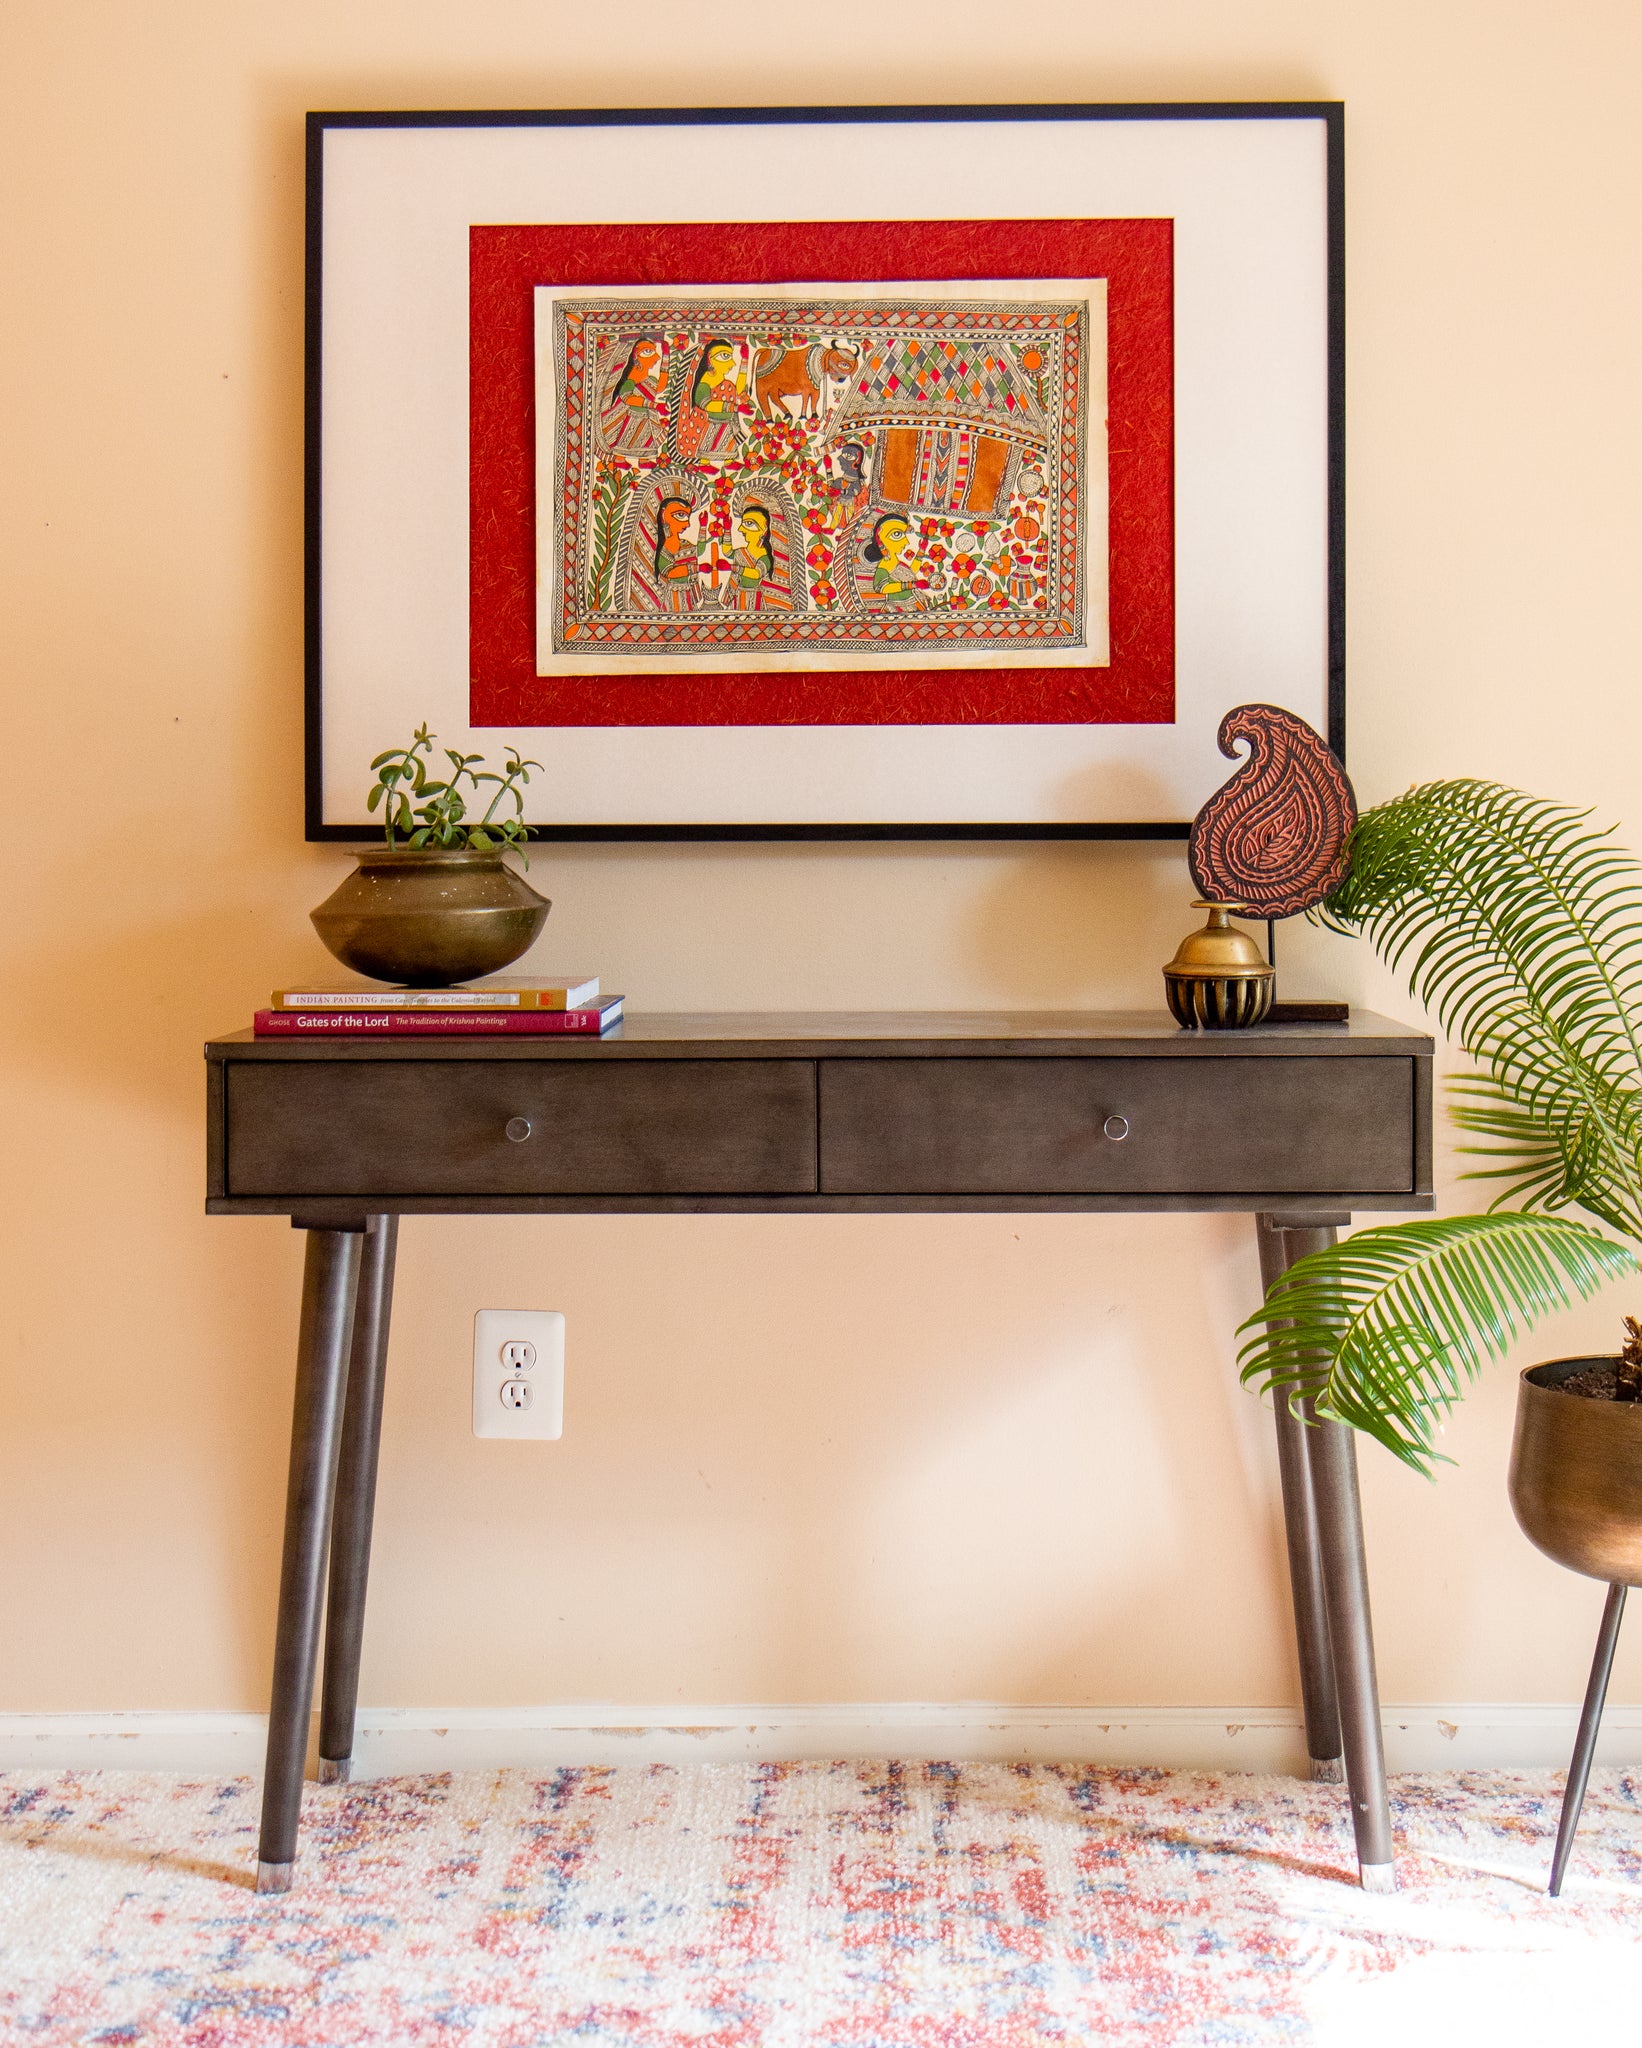 6 Ways to Incorporate South Asian Elements into your Home